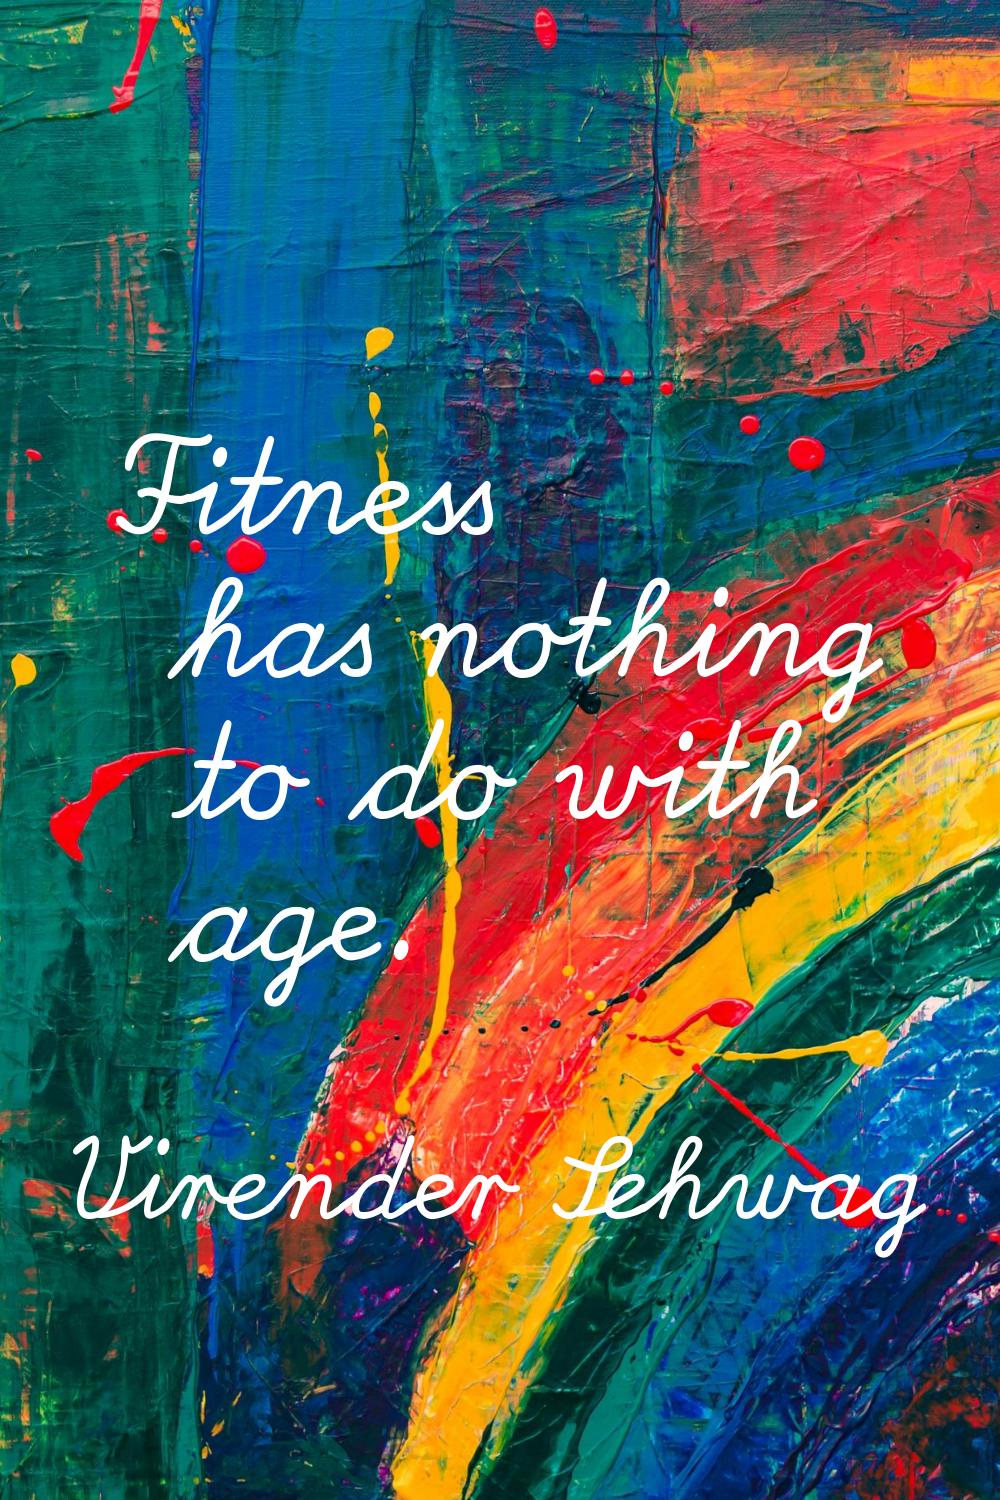 Fitness has nothing to do with age.